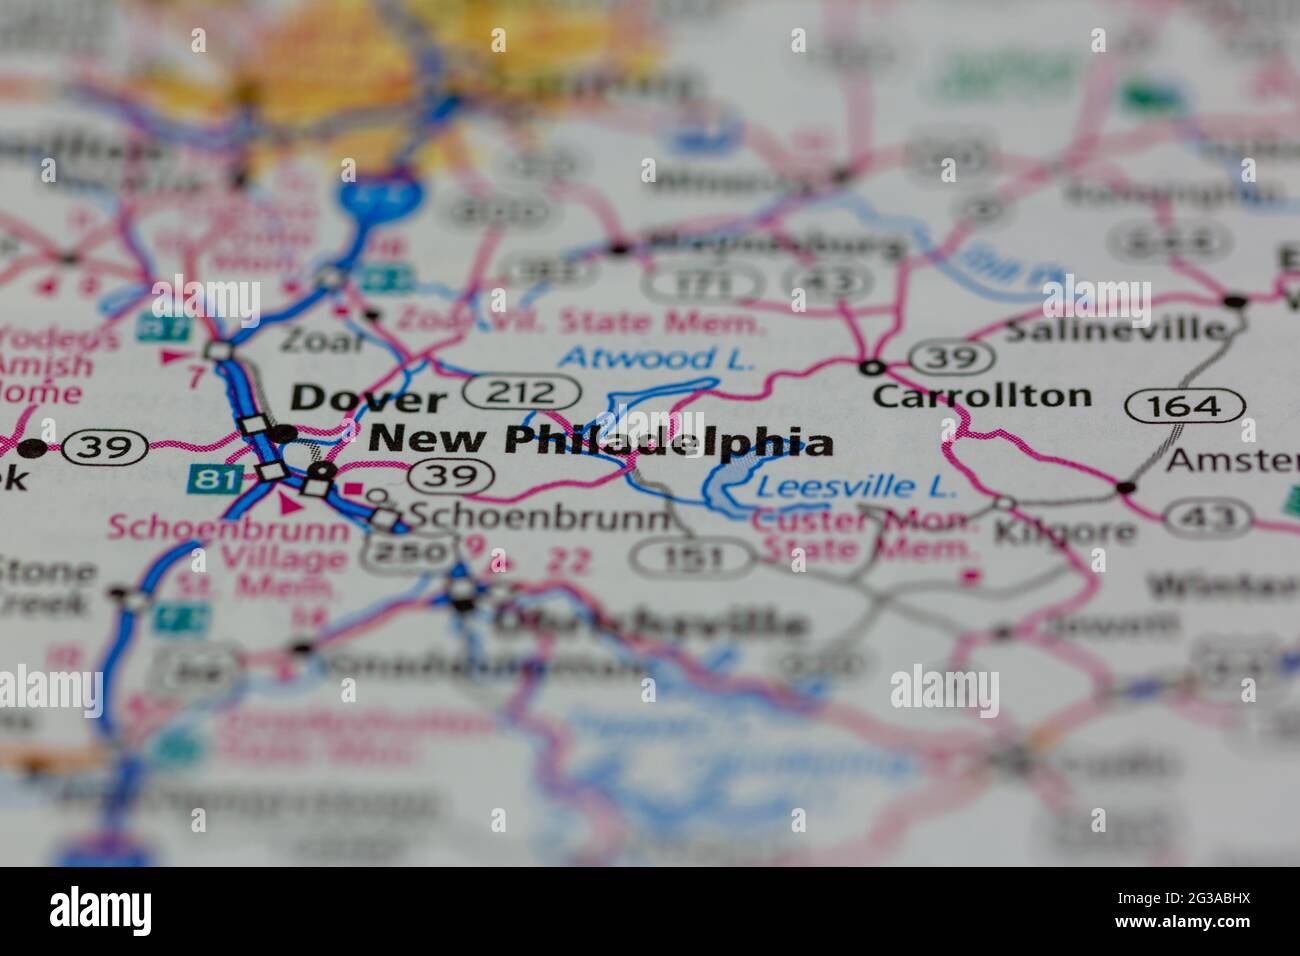 New Philadelphia Ohio USA shown on a Geography map or Road map Stock Photo